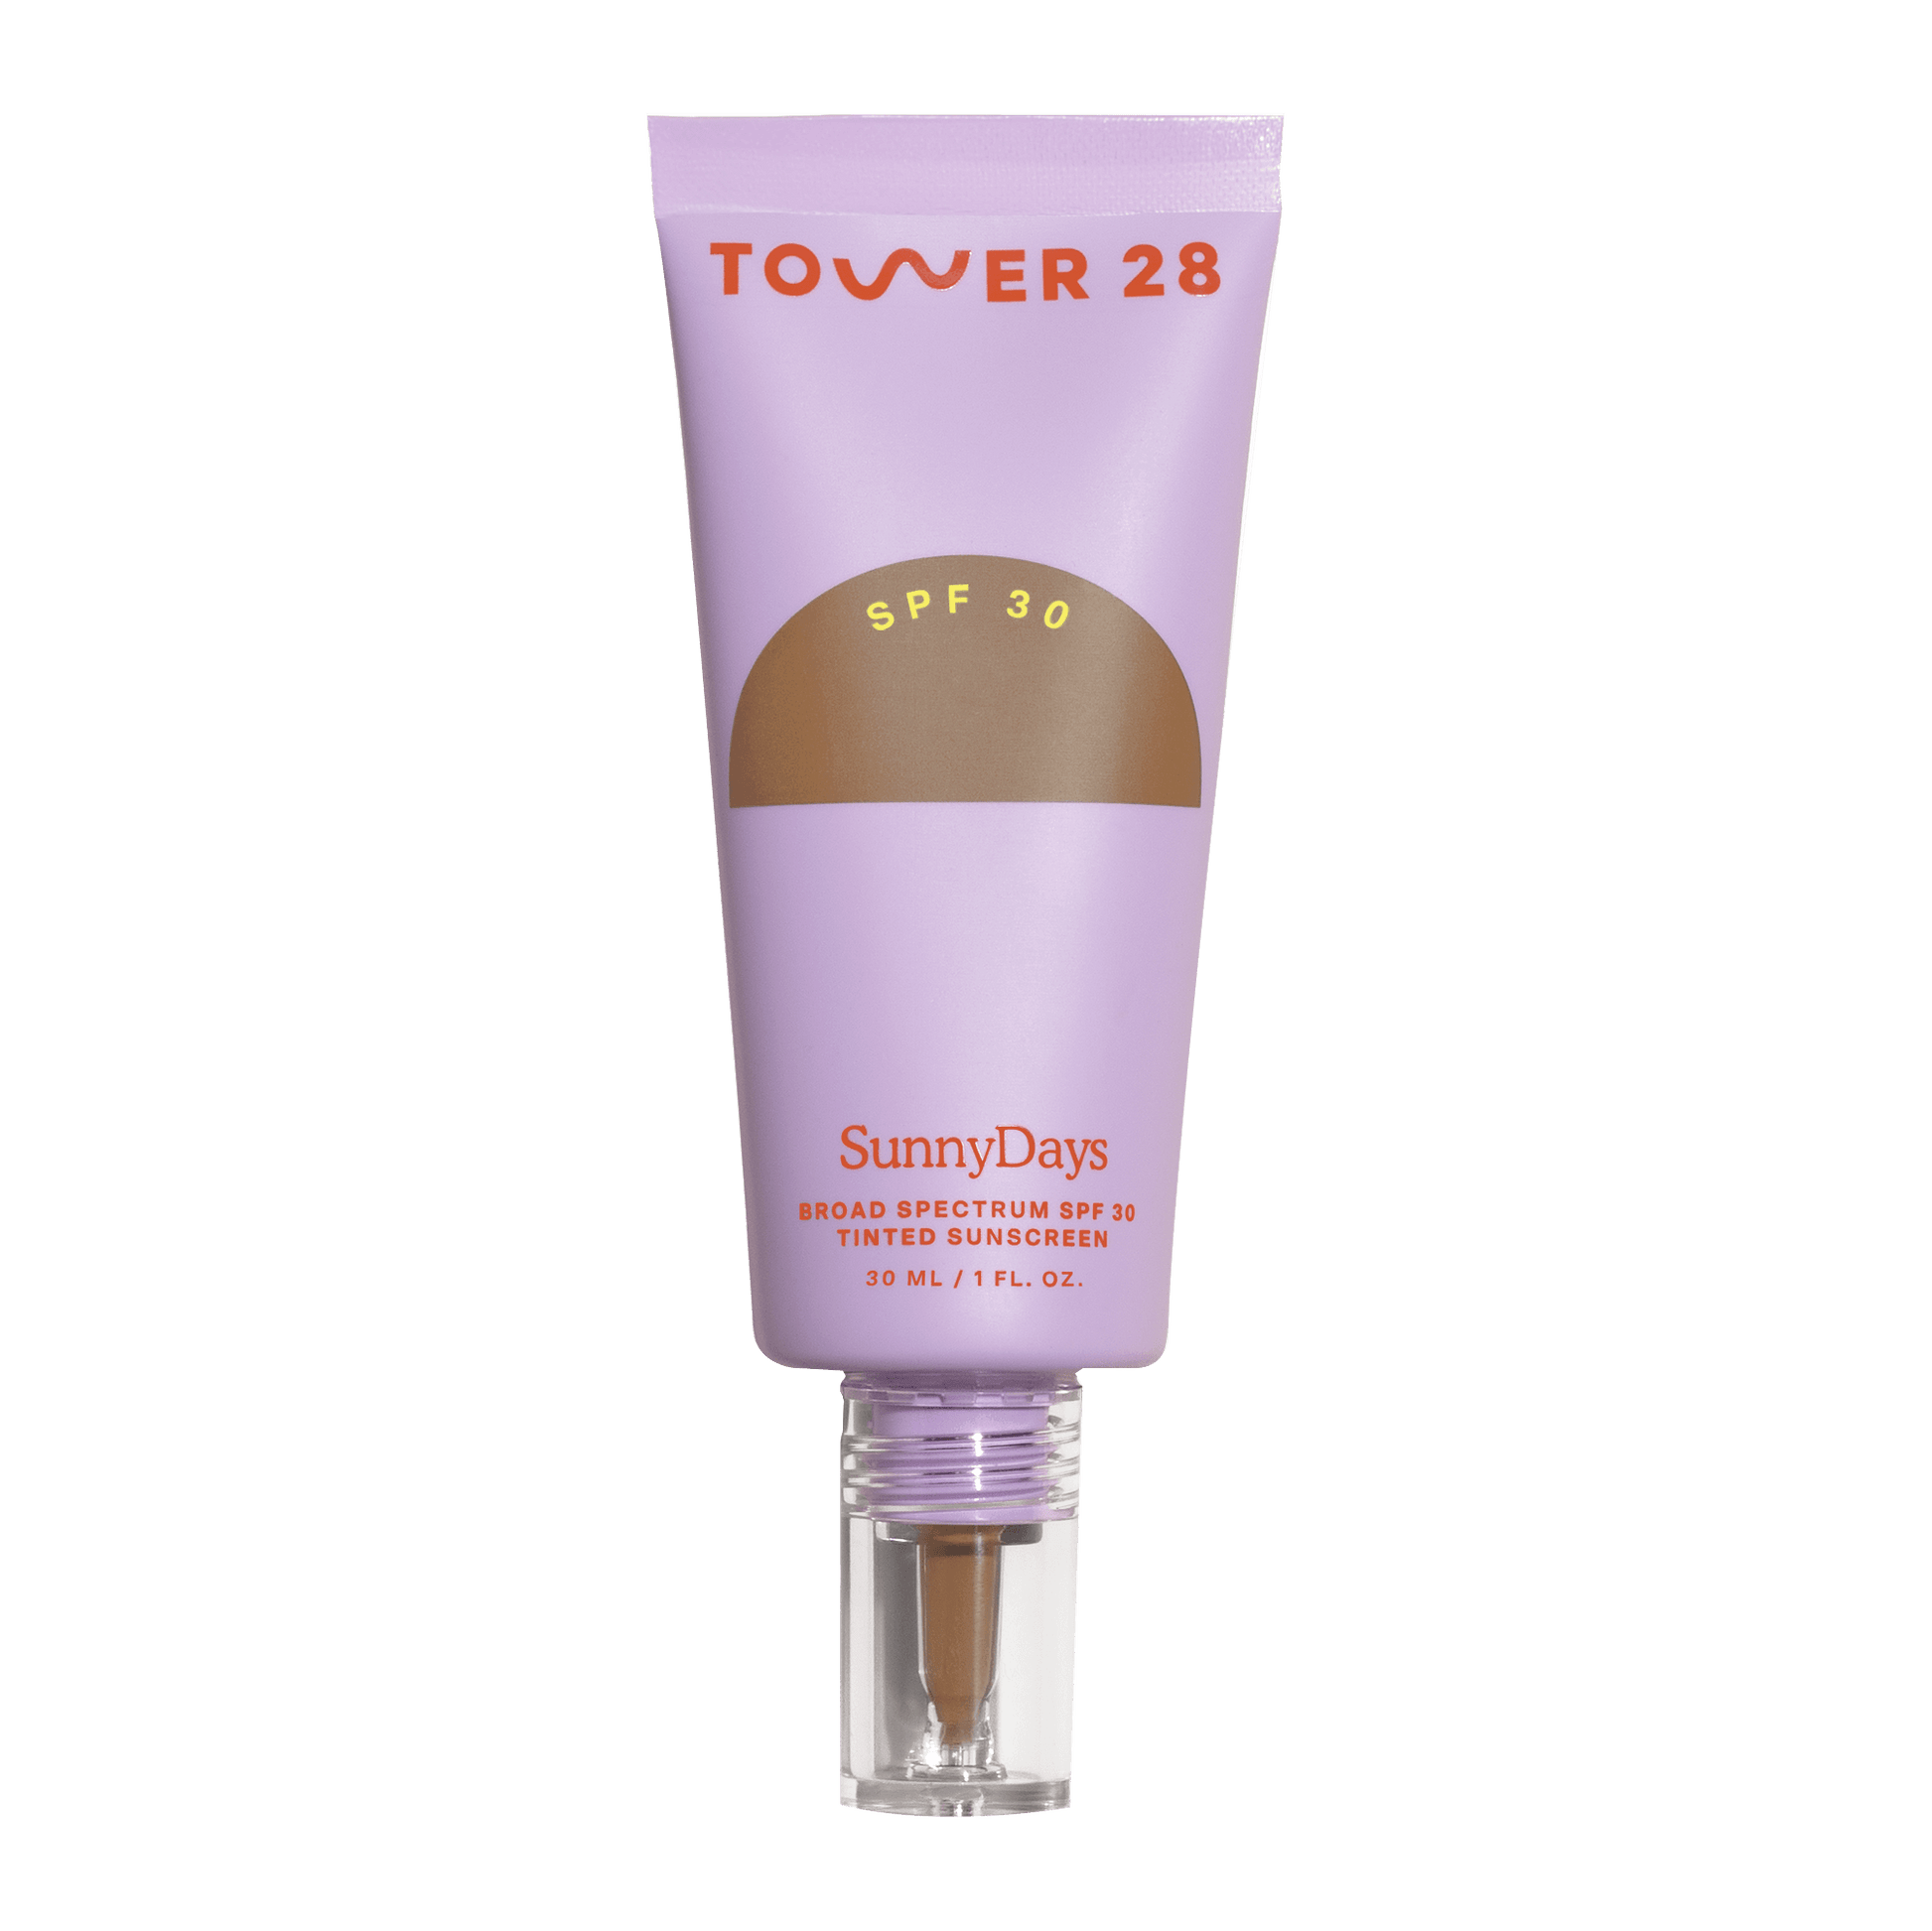 Tower 28 Beauty SunnyDays™ Tinted SPF 30 in the shade 40 Runyon